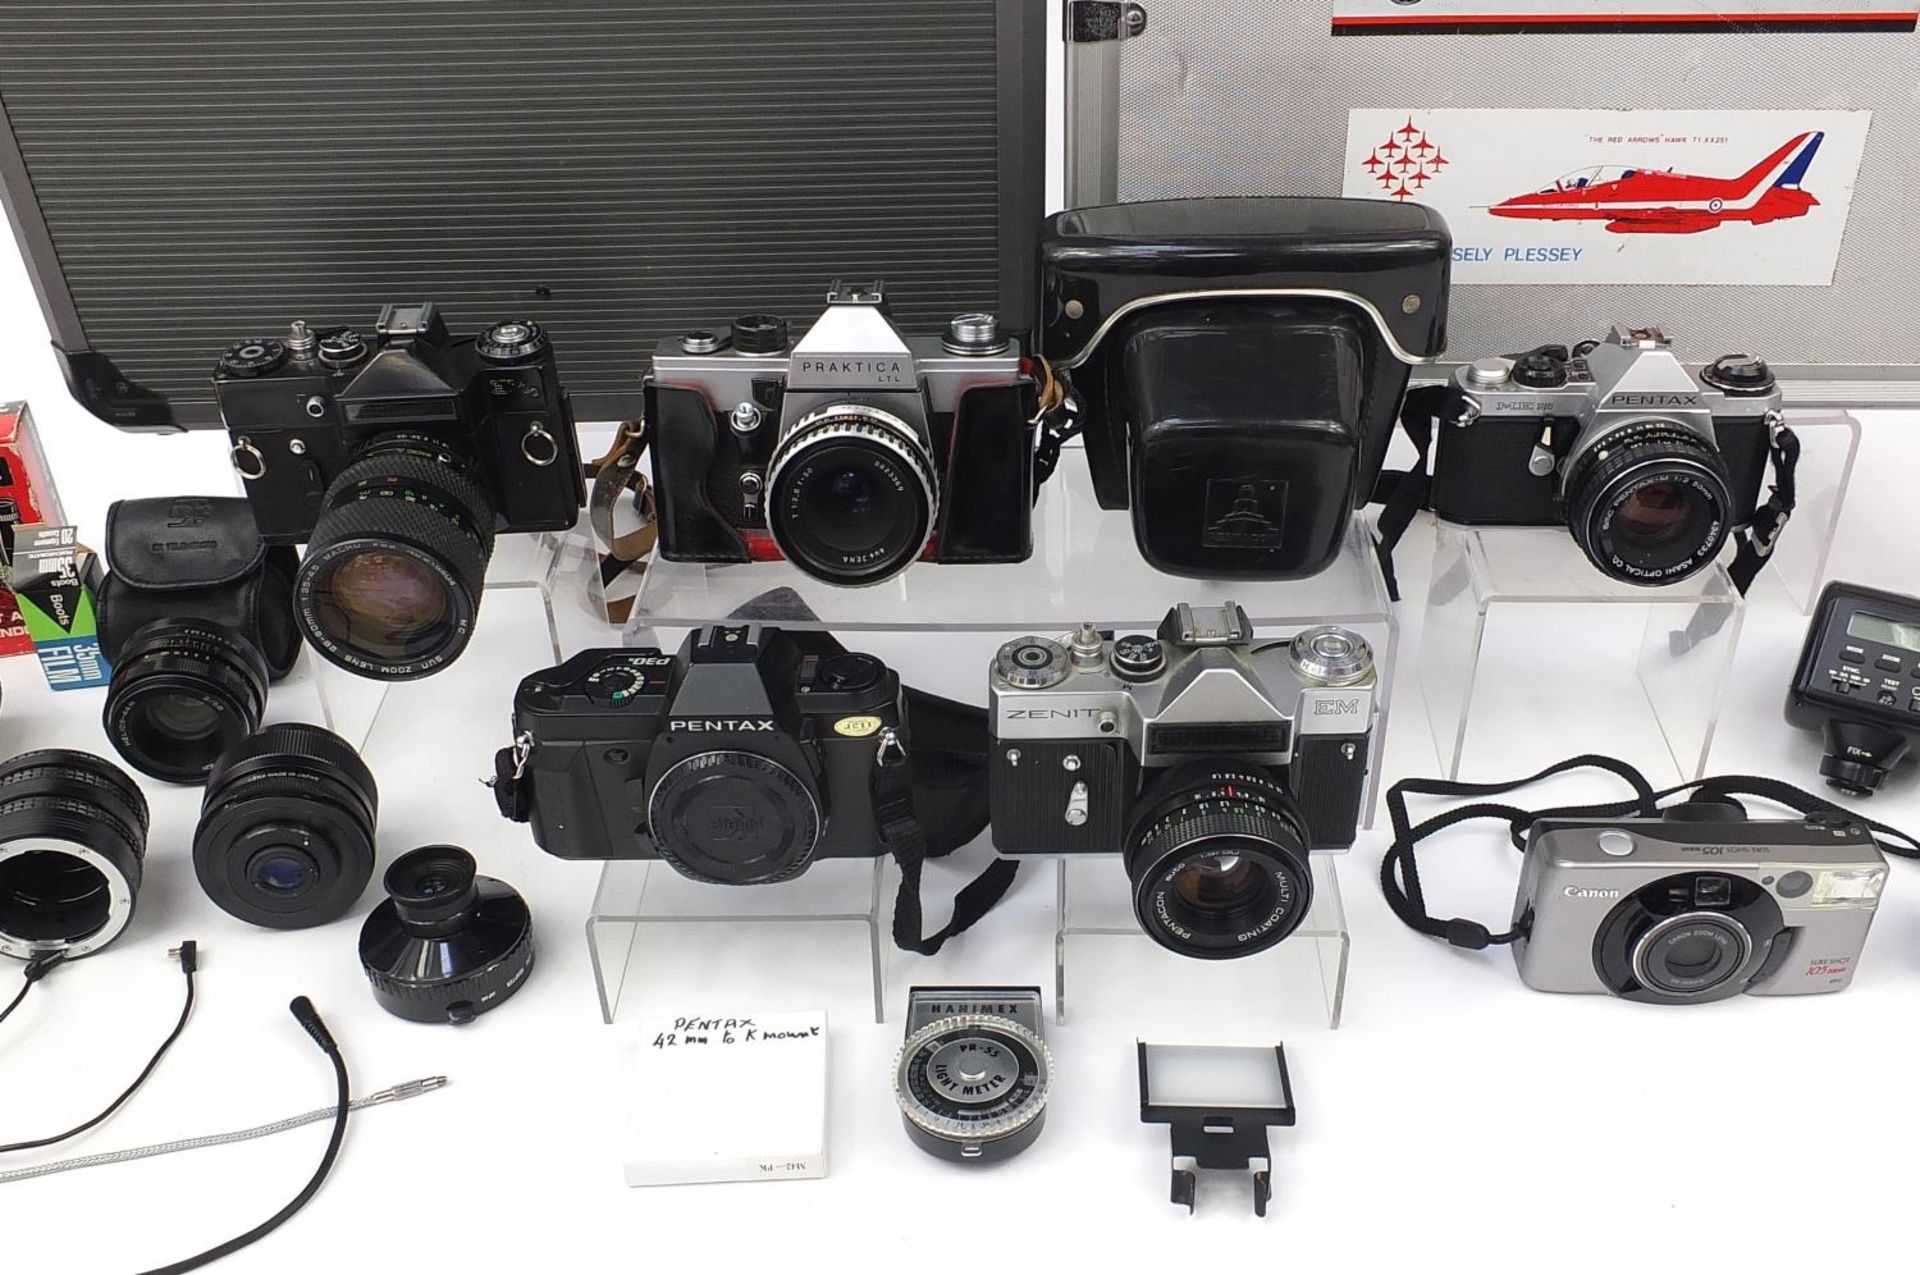 Vintage and later cameras, lenses and accesories including Zenith, Pentax, Canon, converters, - Image 3 of 5